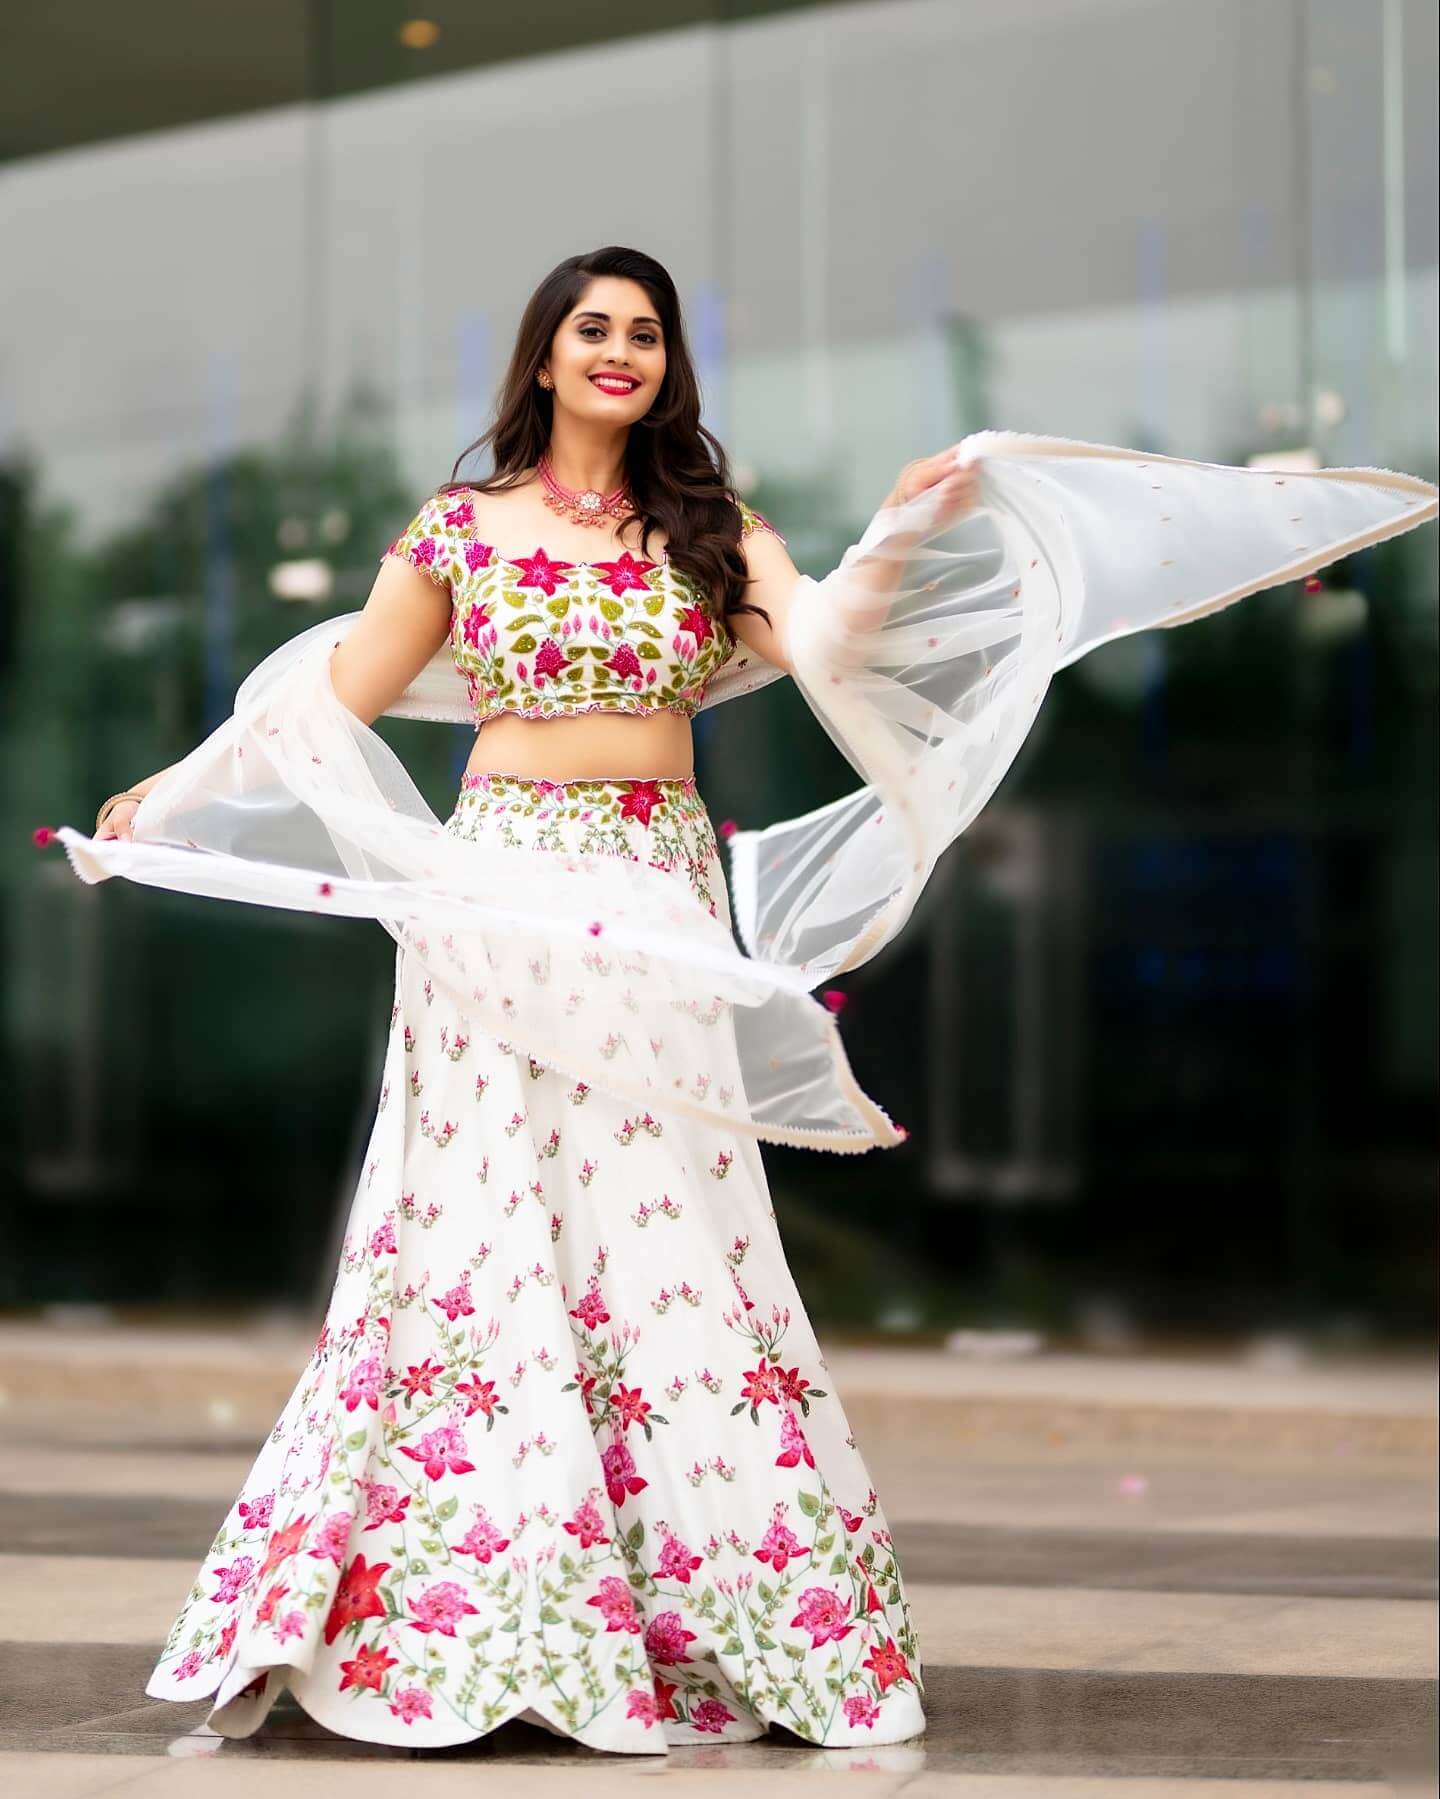 Surbhi Puranik In White Floral Print Lehenga Lovely Outfits & Pretty Looks